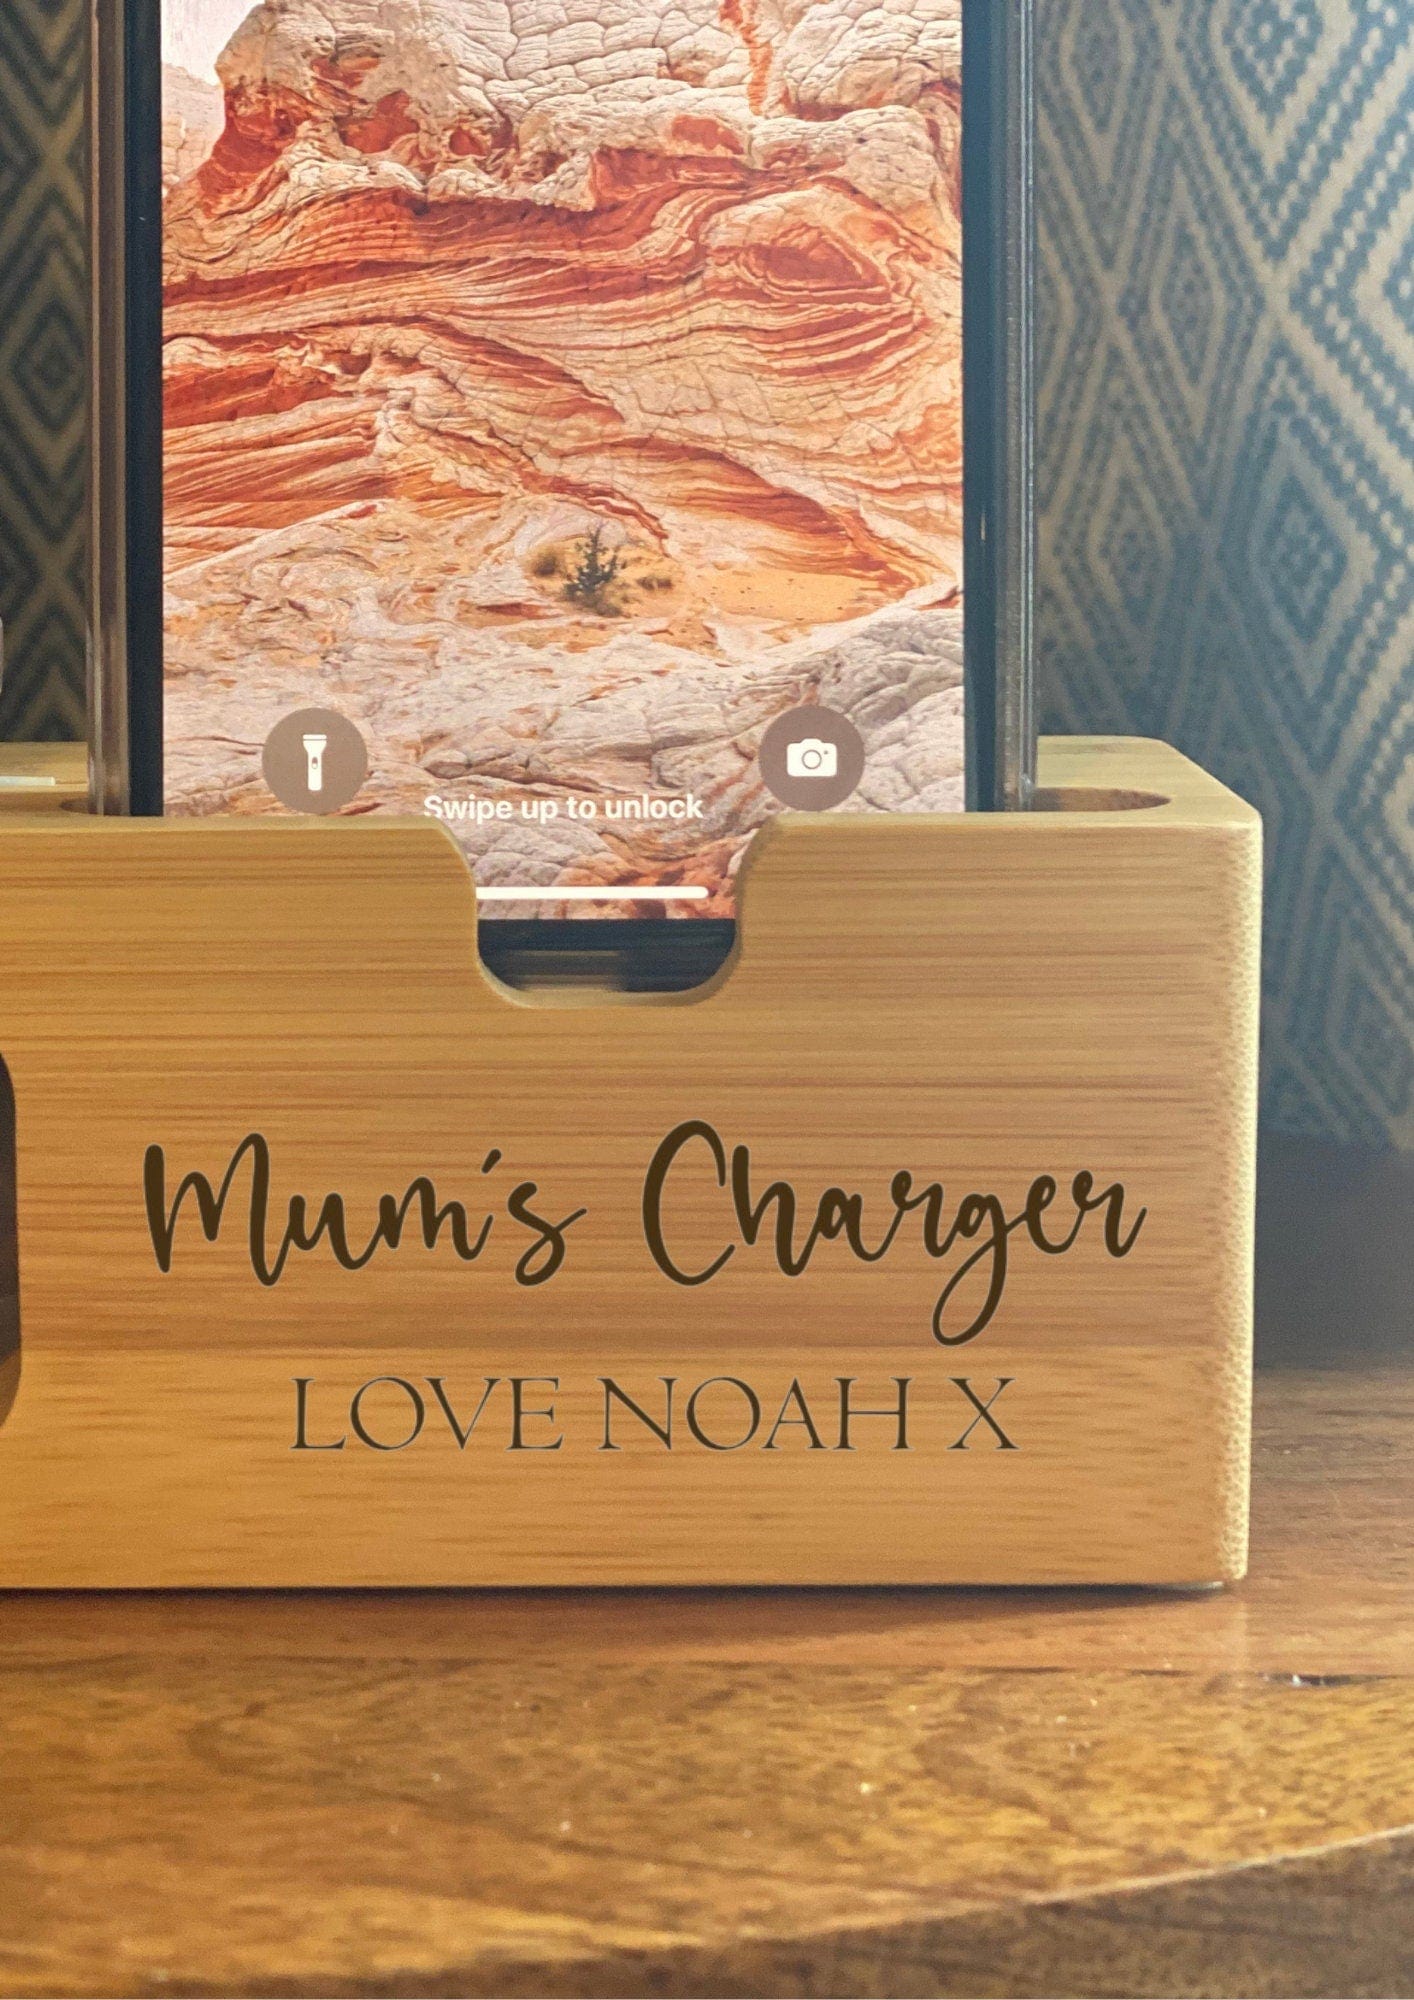 Lua Nova Charging Stations Mum's Charger - Bamboo Apple Watch & Mobile iPhone Charging Station